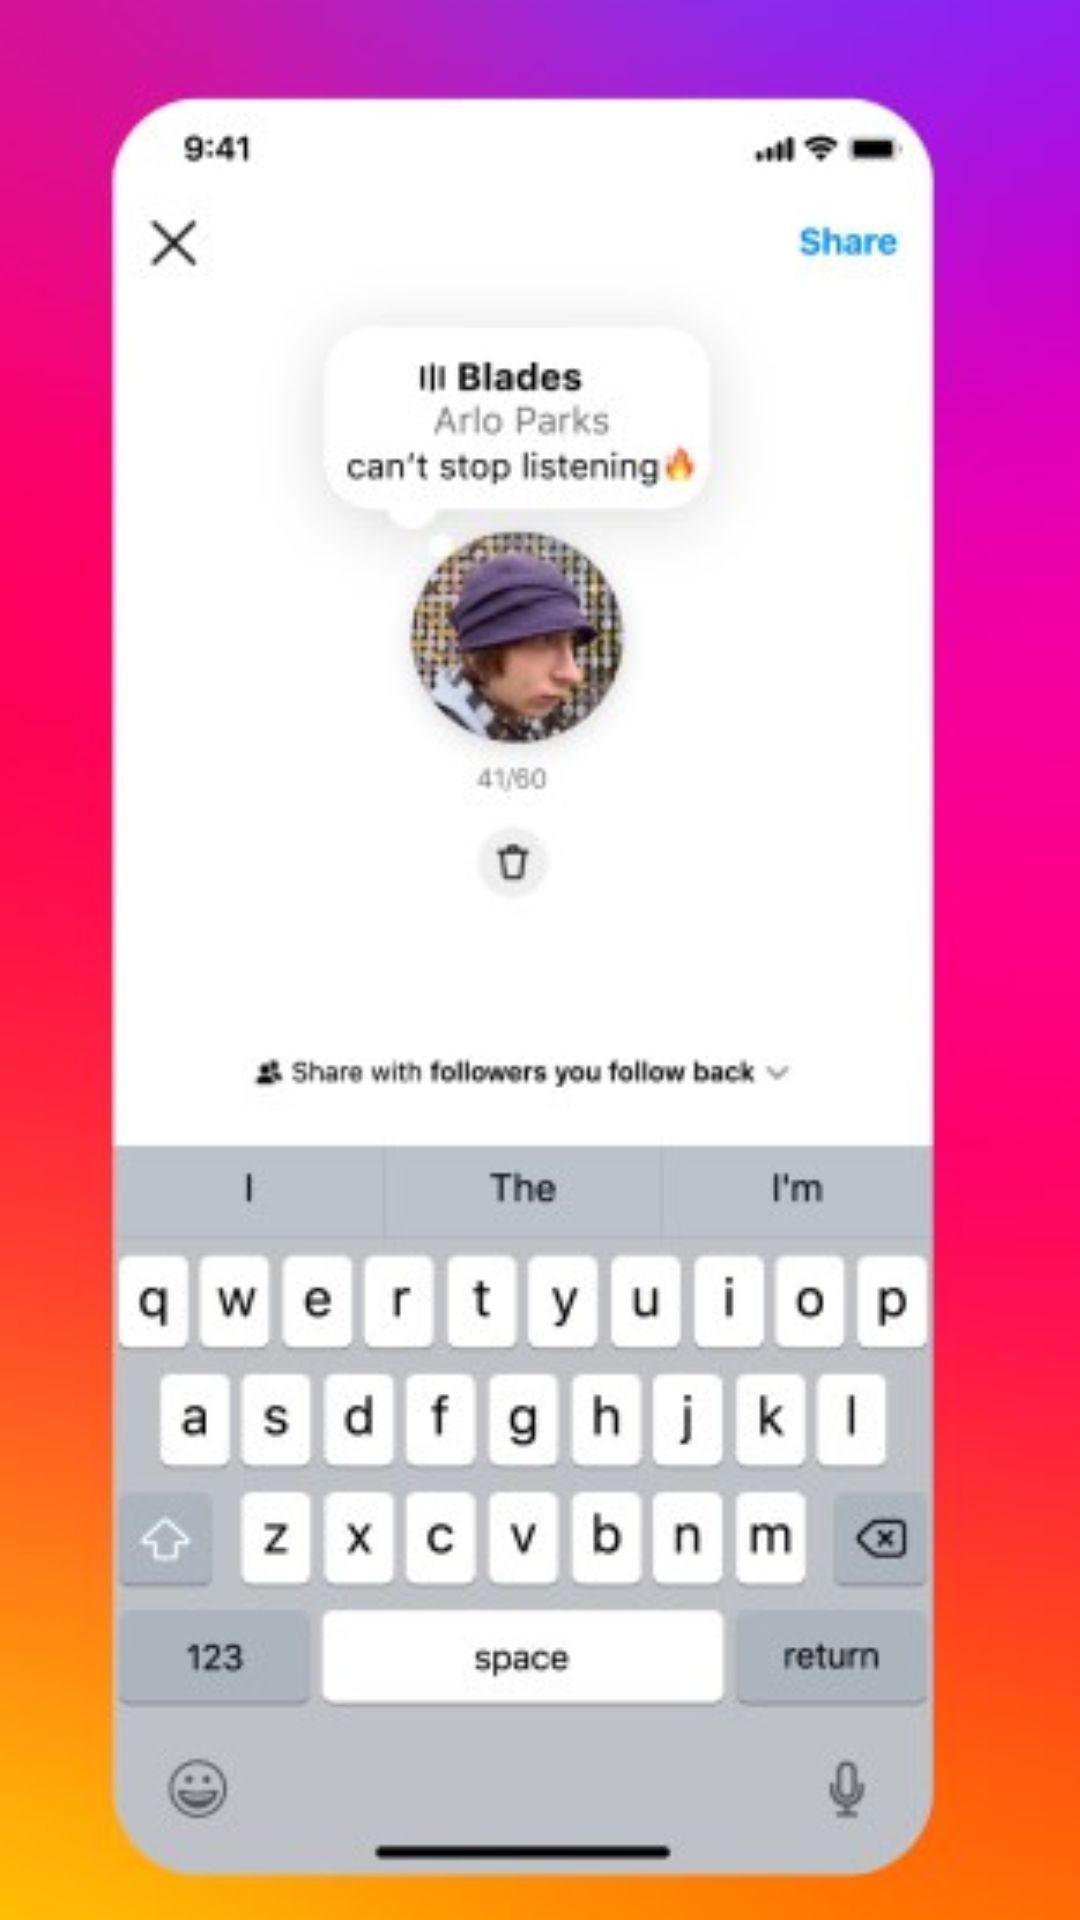 Steps to add music in Instagram Notes: A quick and easy guide